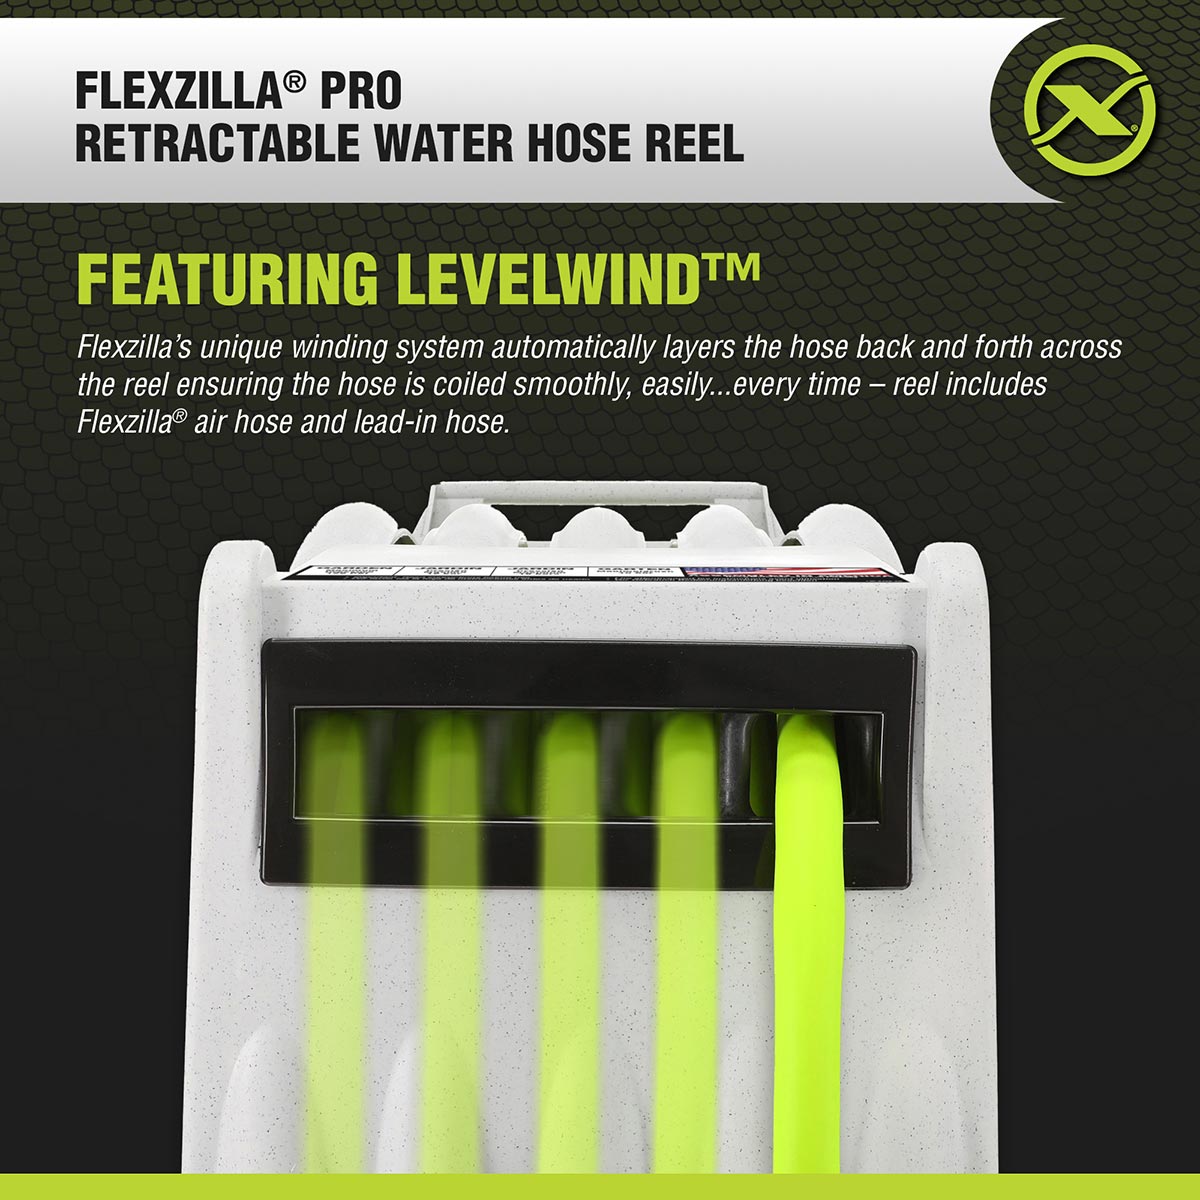 Flexzilla Retractable Water Hose Reel With Levelwind Technology 1/2" X 70'